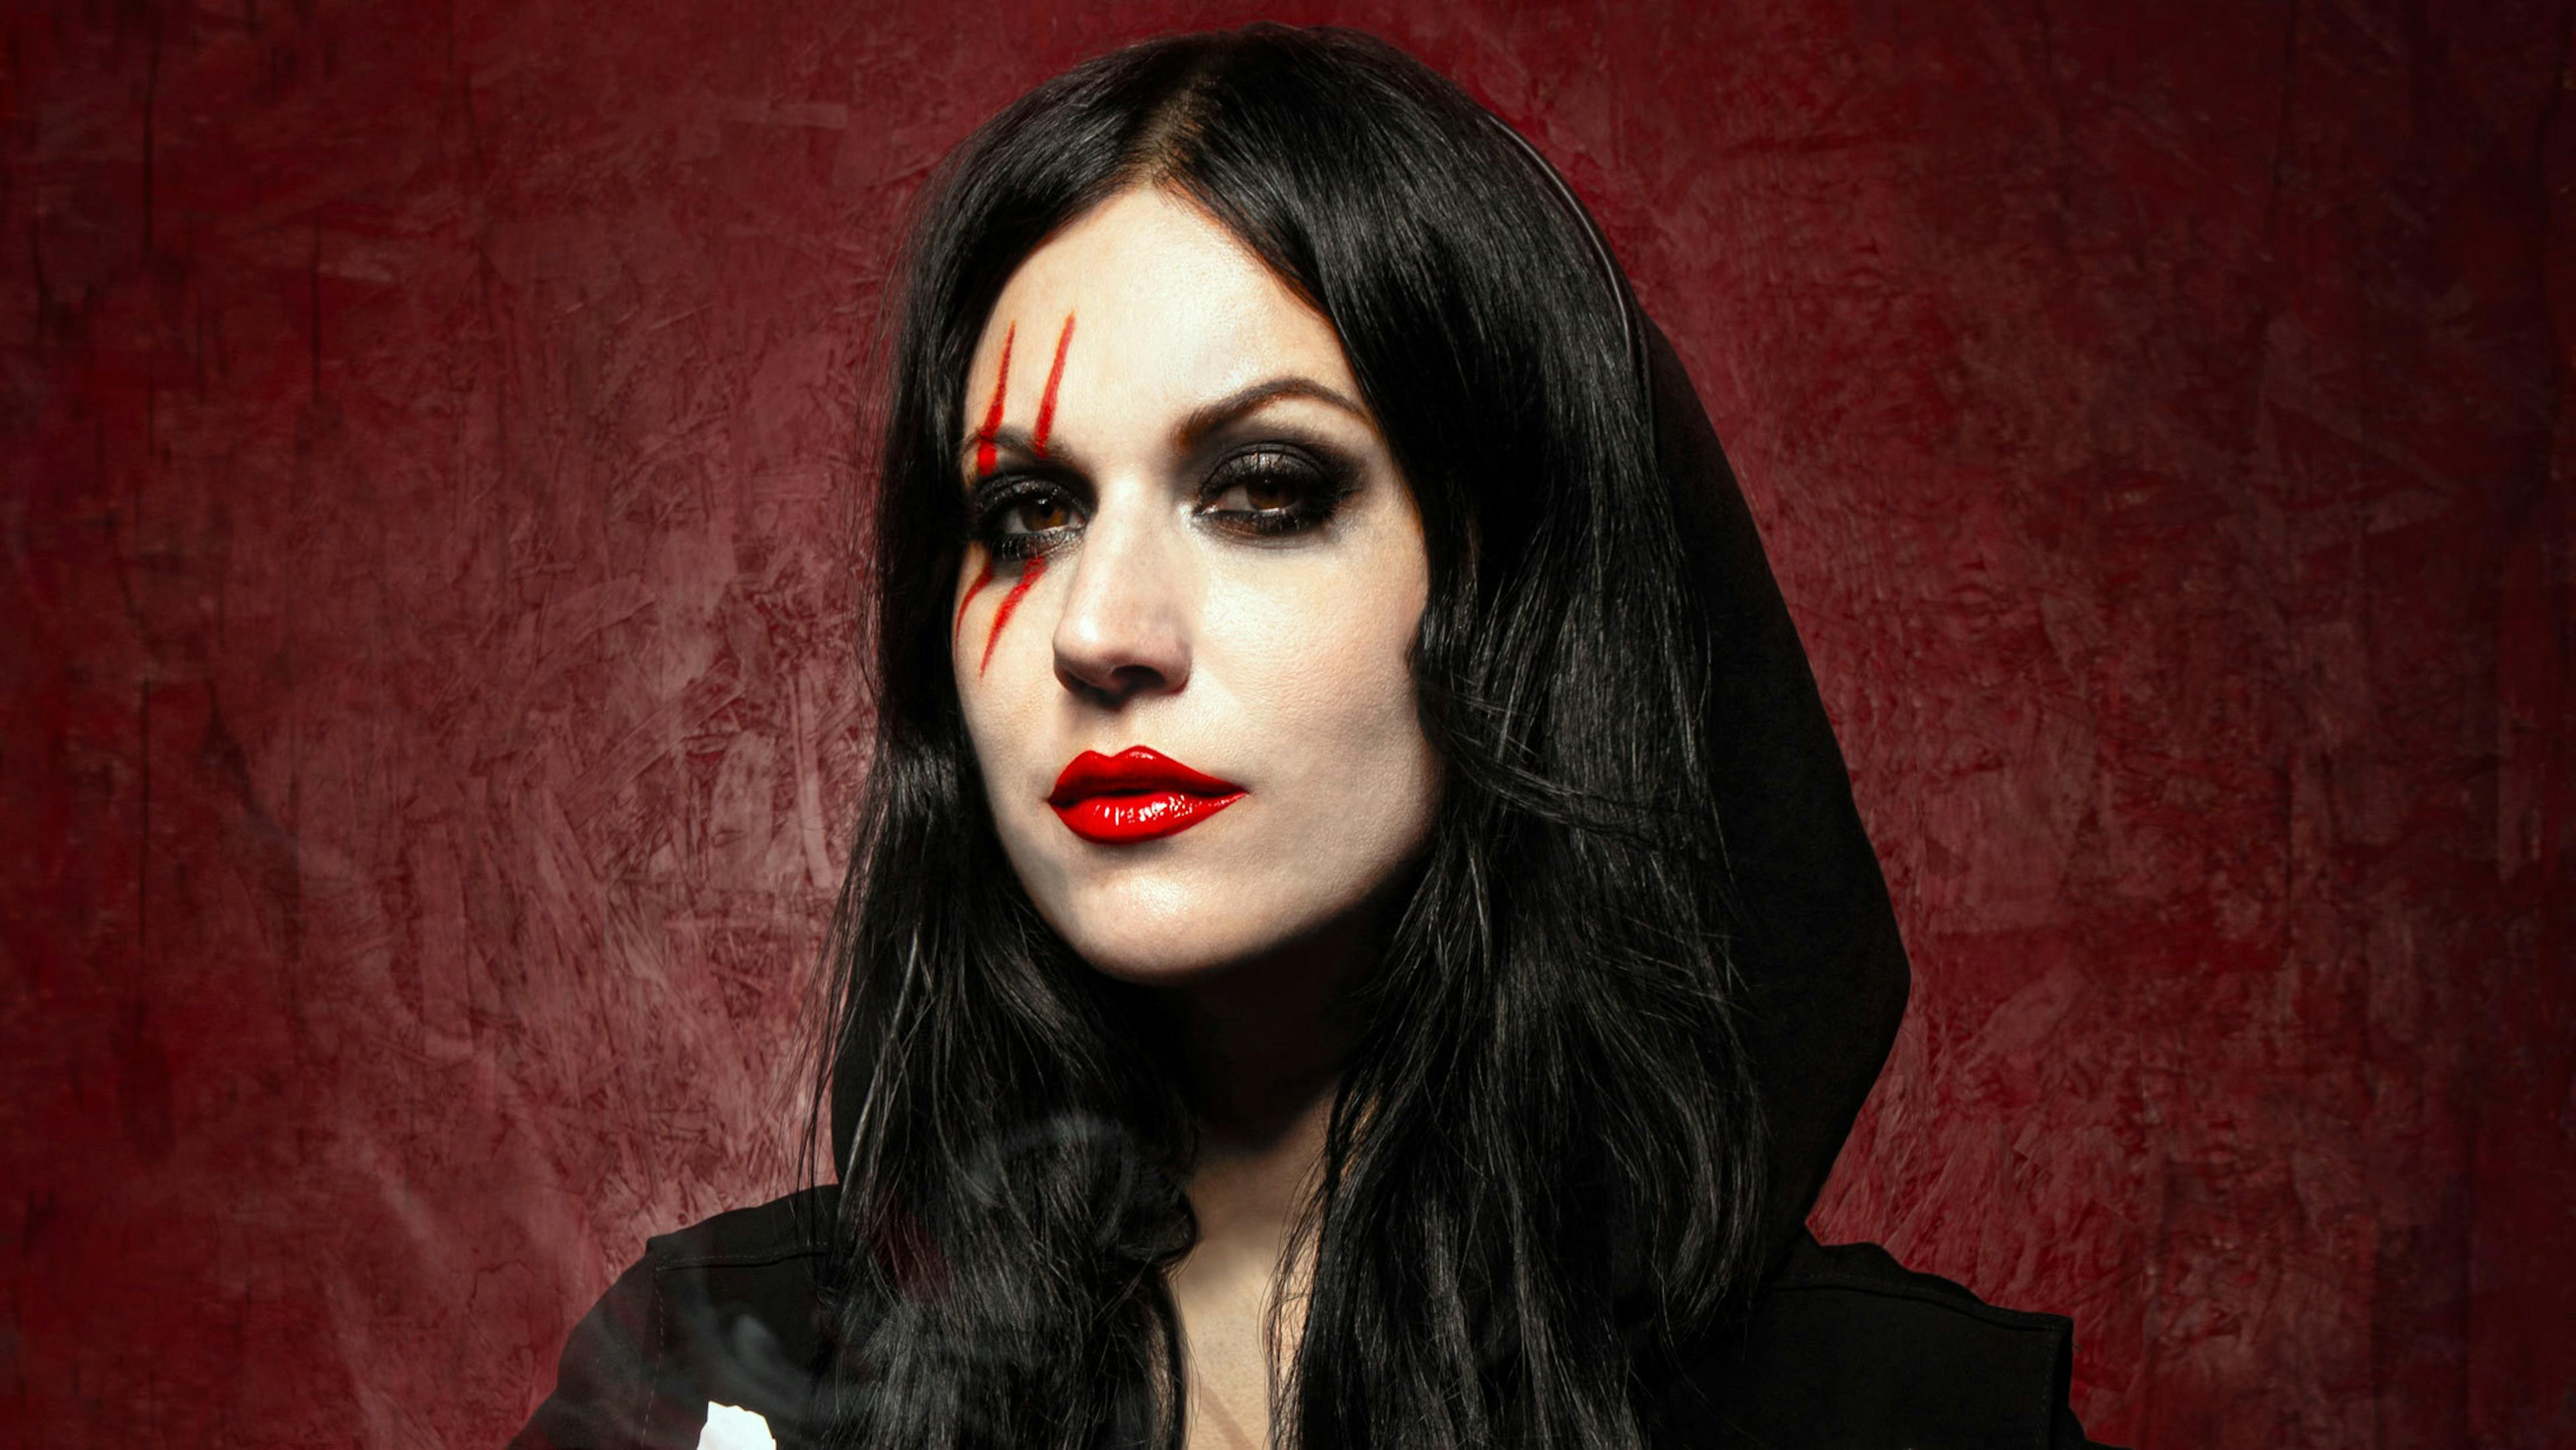 “I’m addicted to Pokémon GO”: 13 Questions with Cristina Scabbia